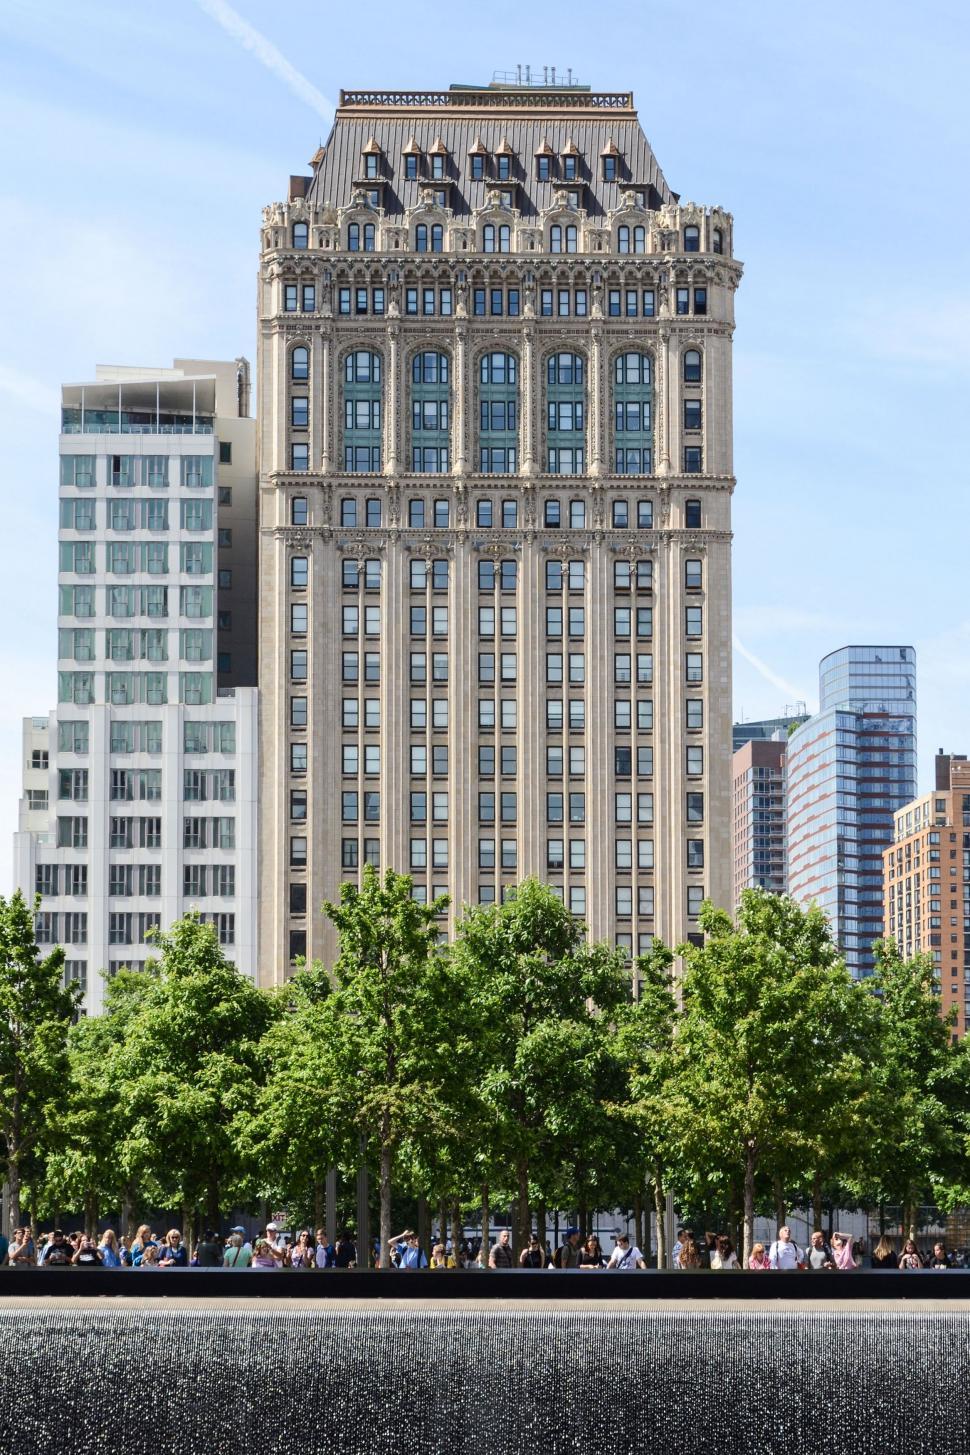 Free Image of Modern Skyscraper With Trees in Front 